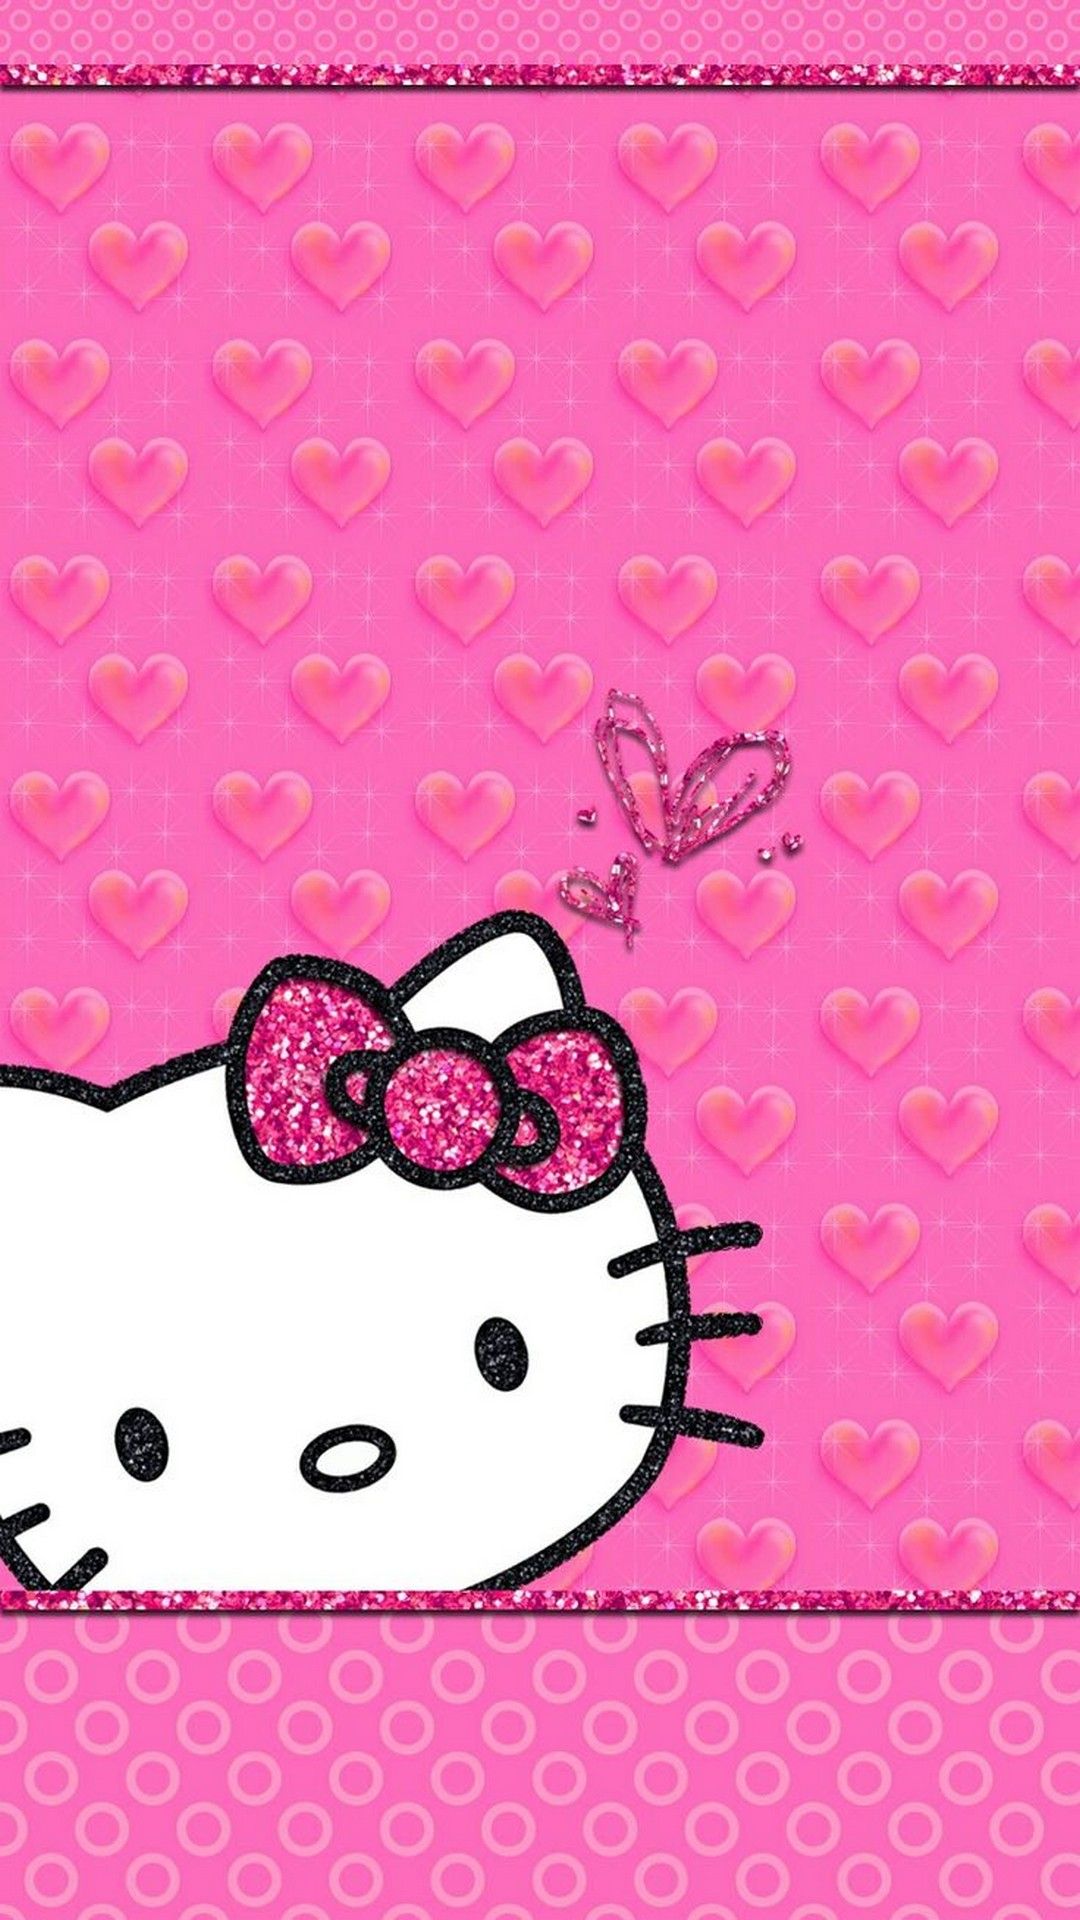 Top Hello Kitty Wallpaper Widescreen For Your Android Or iPhone